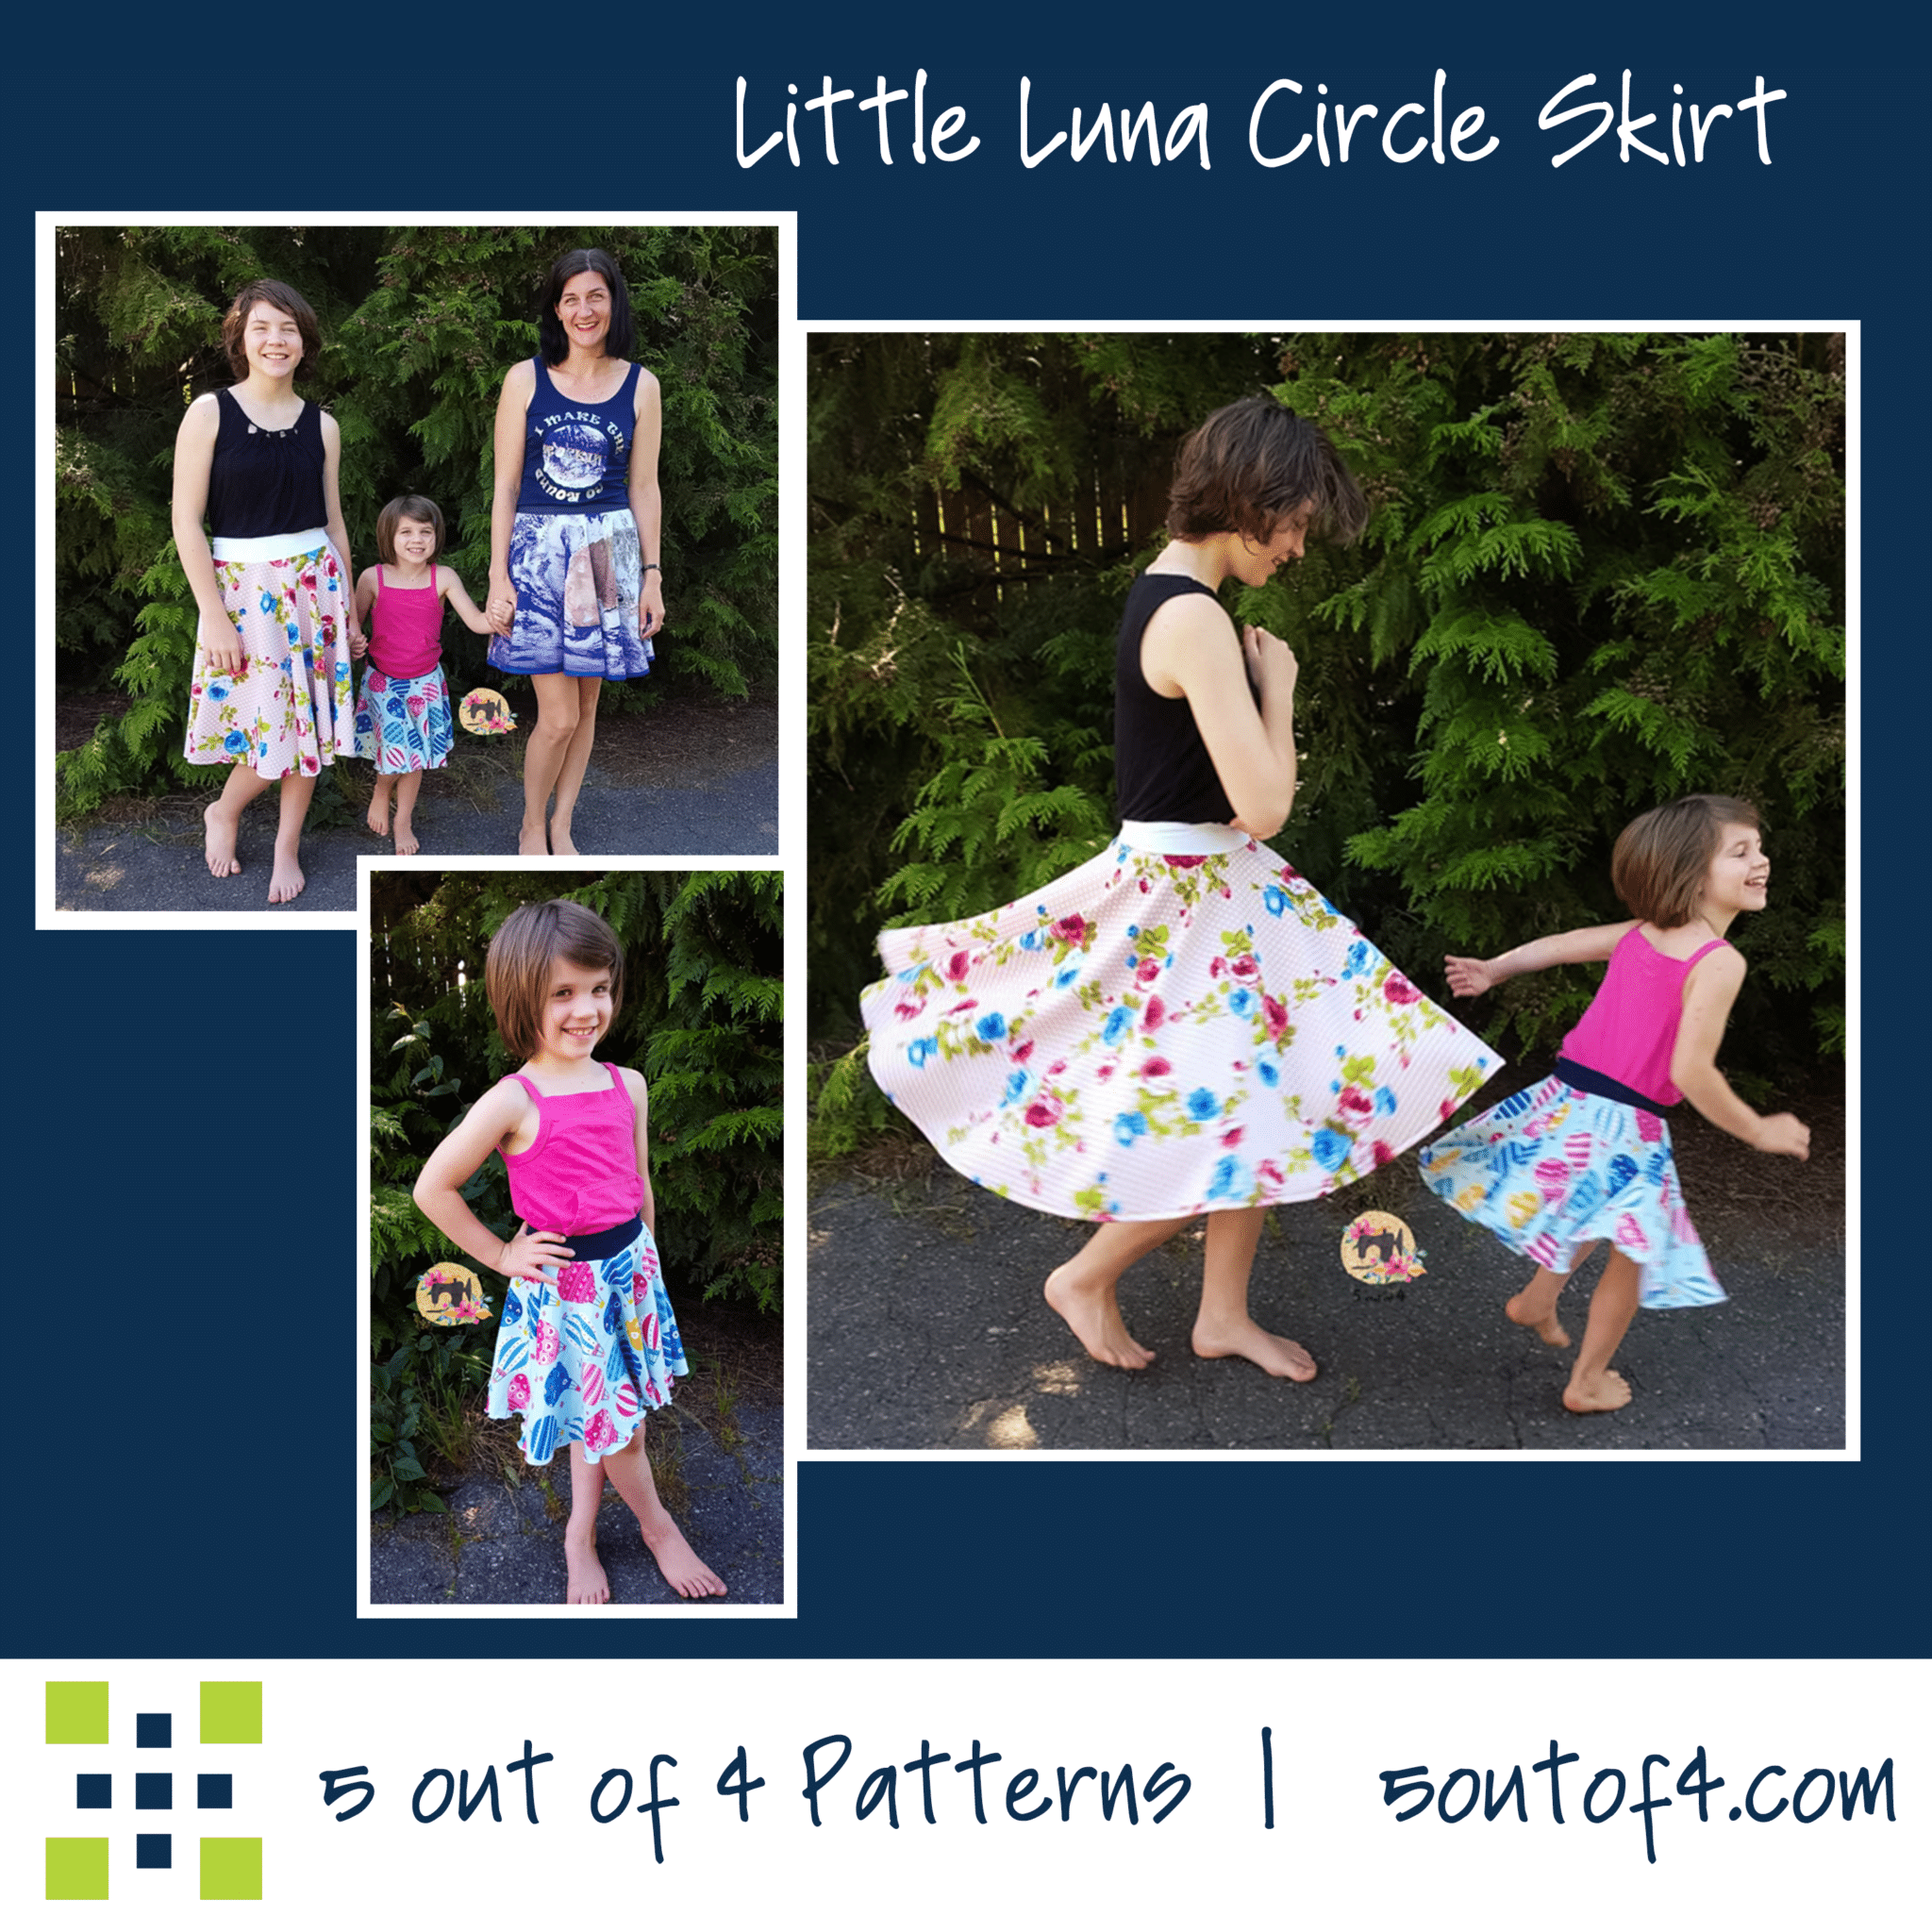 Children's Circle Skirt Petrol With Lions 